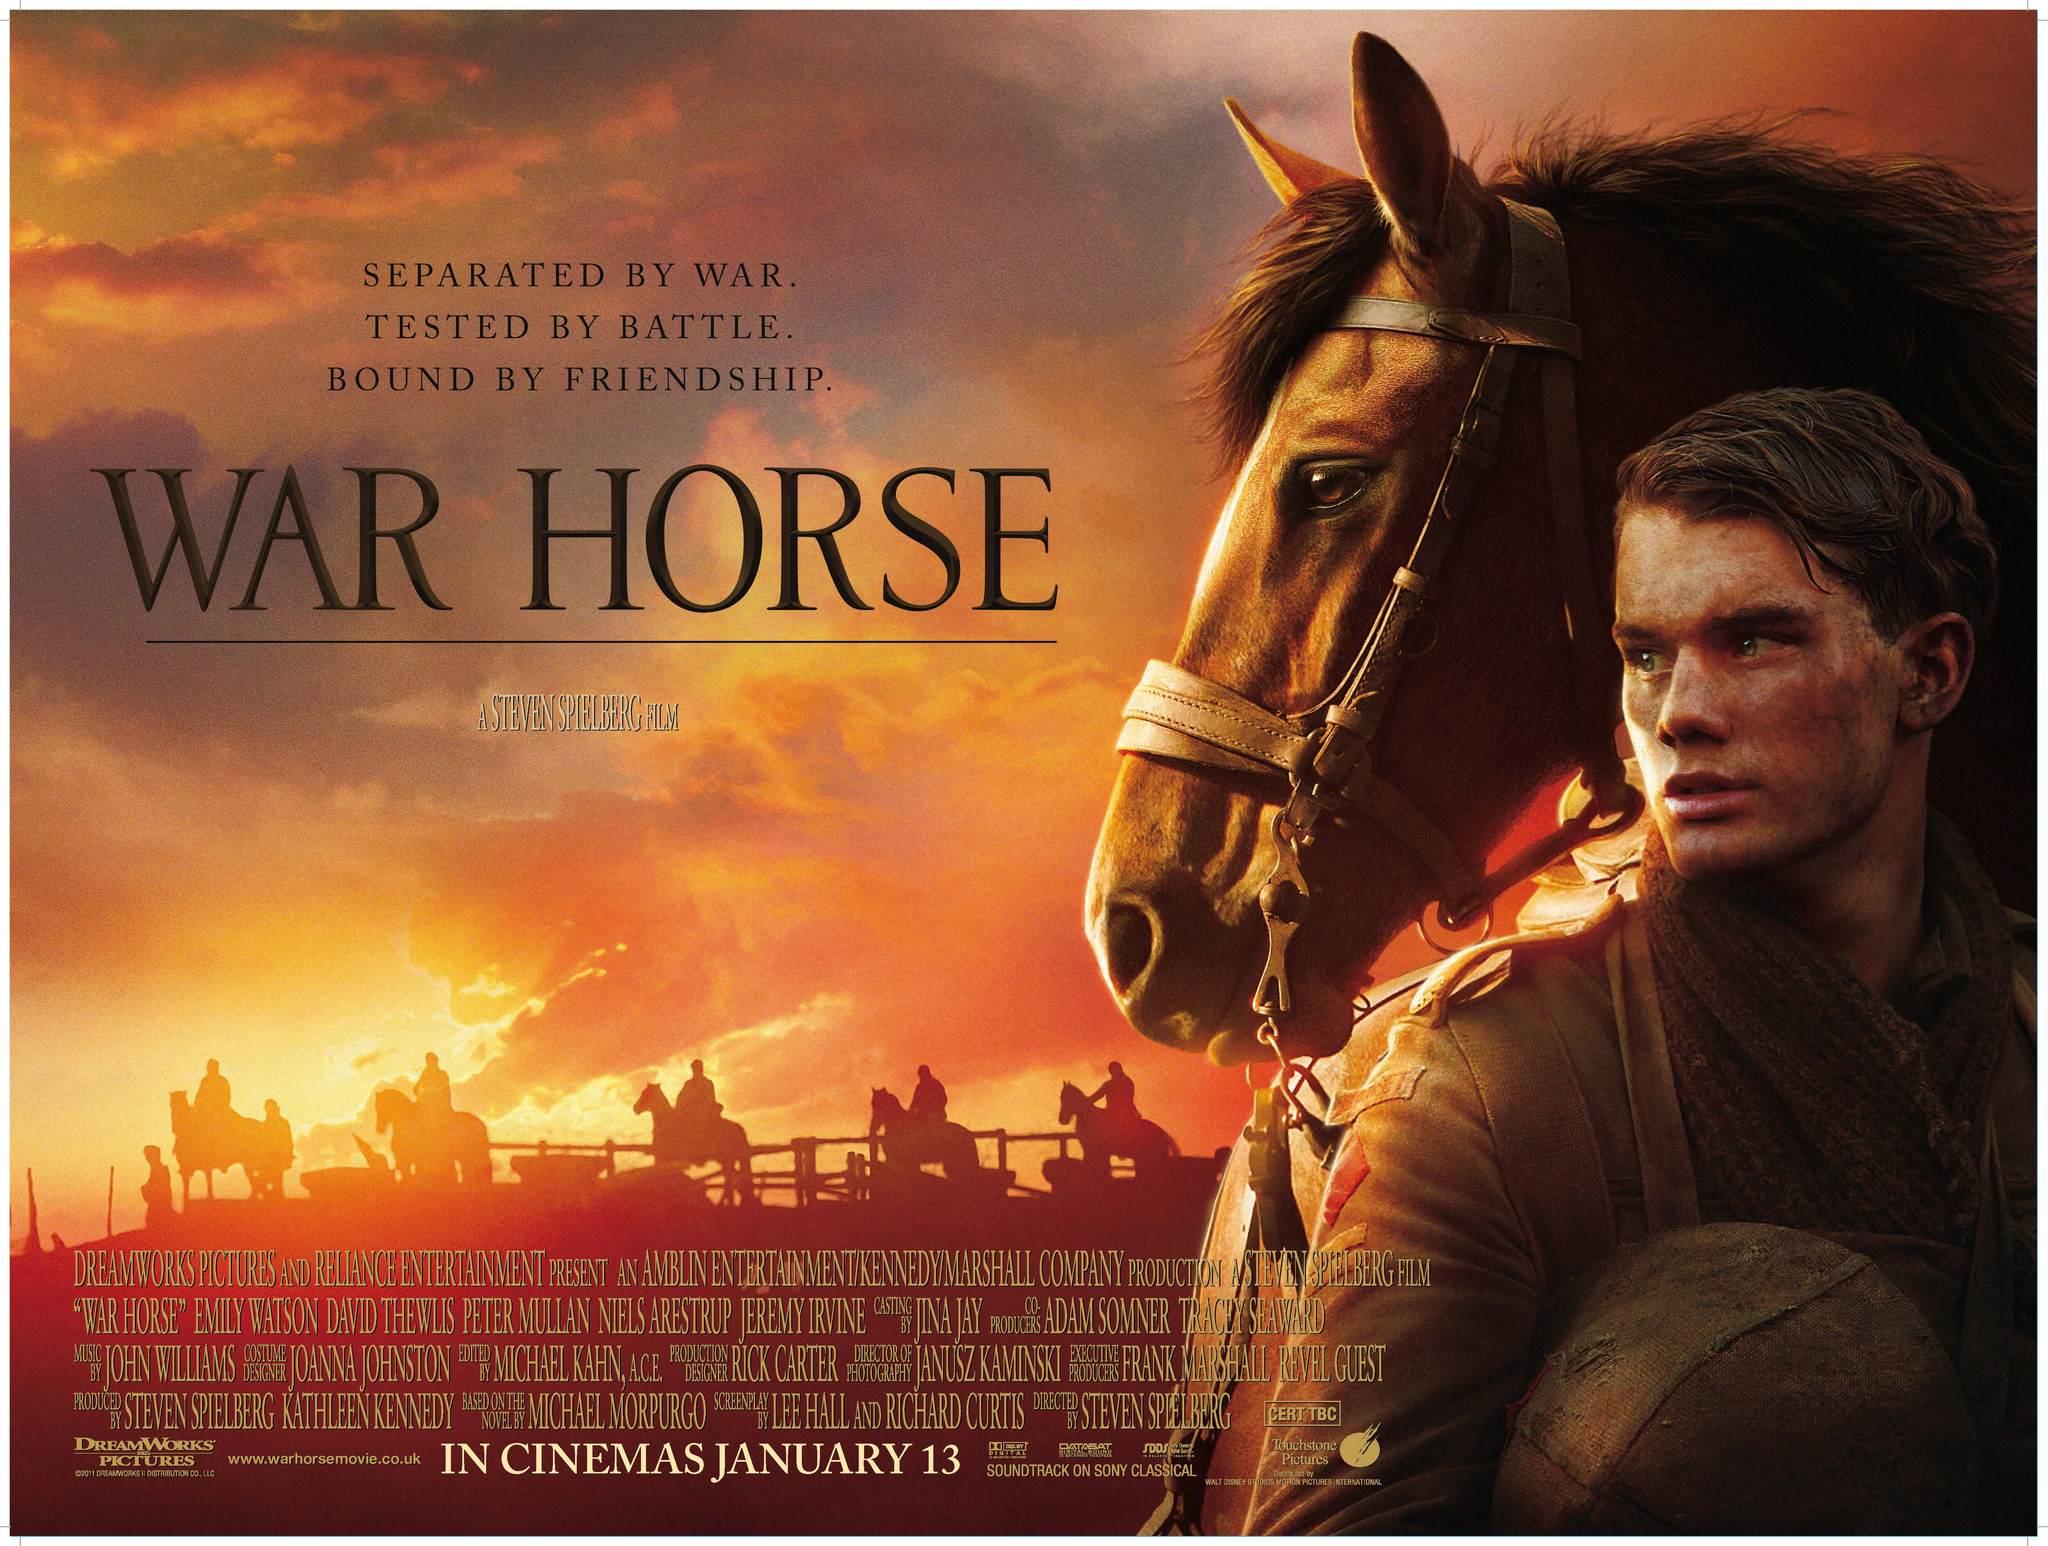 War Horse (film). The JH Movie Collection's Official